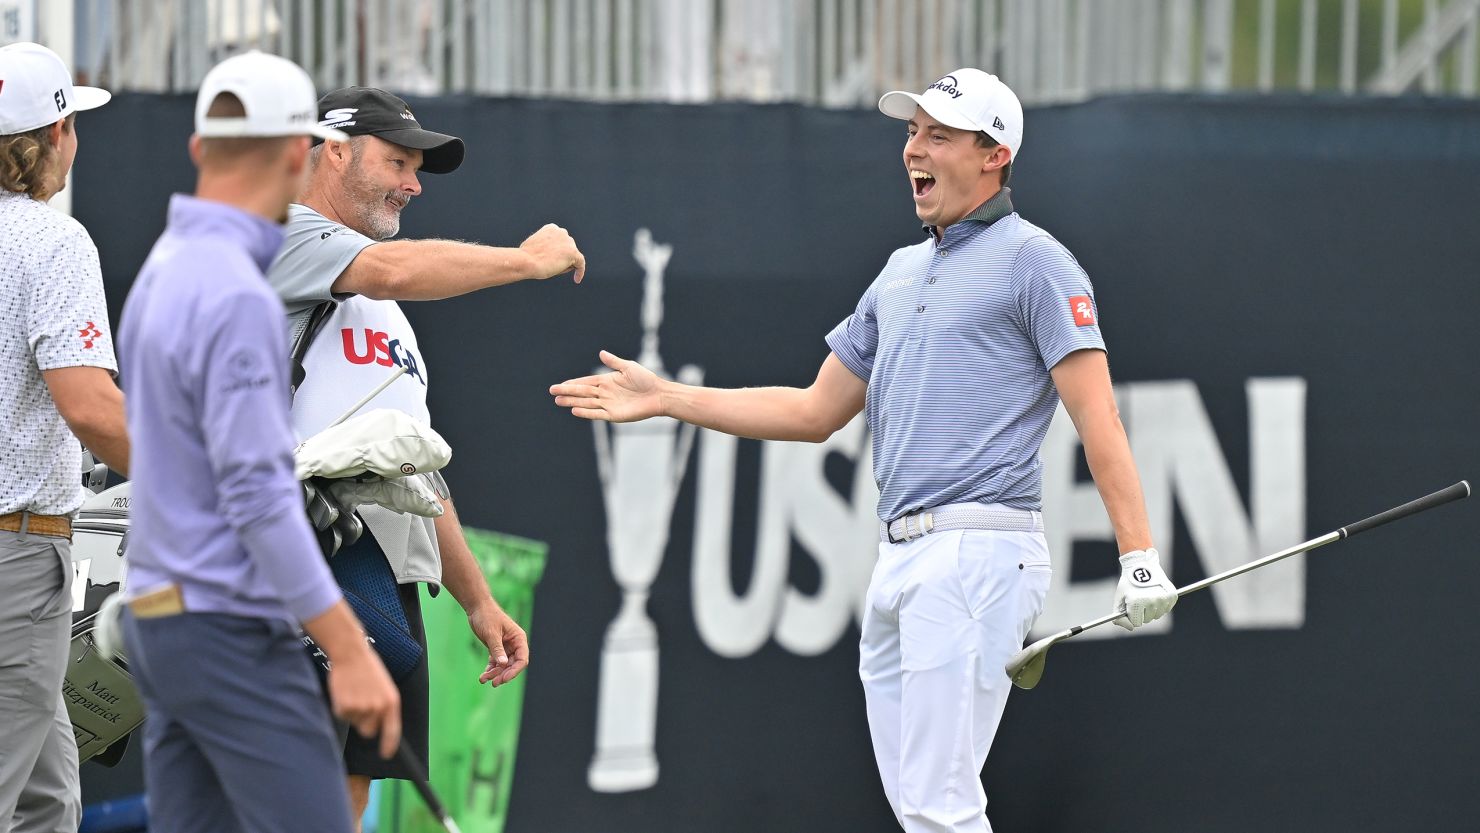 Matt Fitzpatrick celebrates after making an ace on the 15th hole during the second round of the 123rd U.S. Open Championship at The Los Angeles Country Club in California.